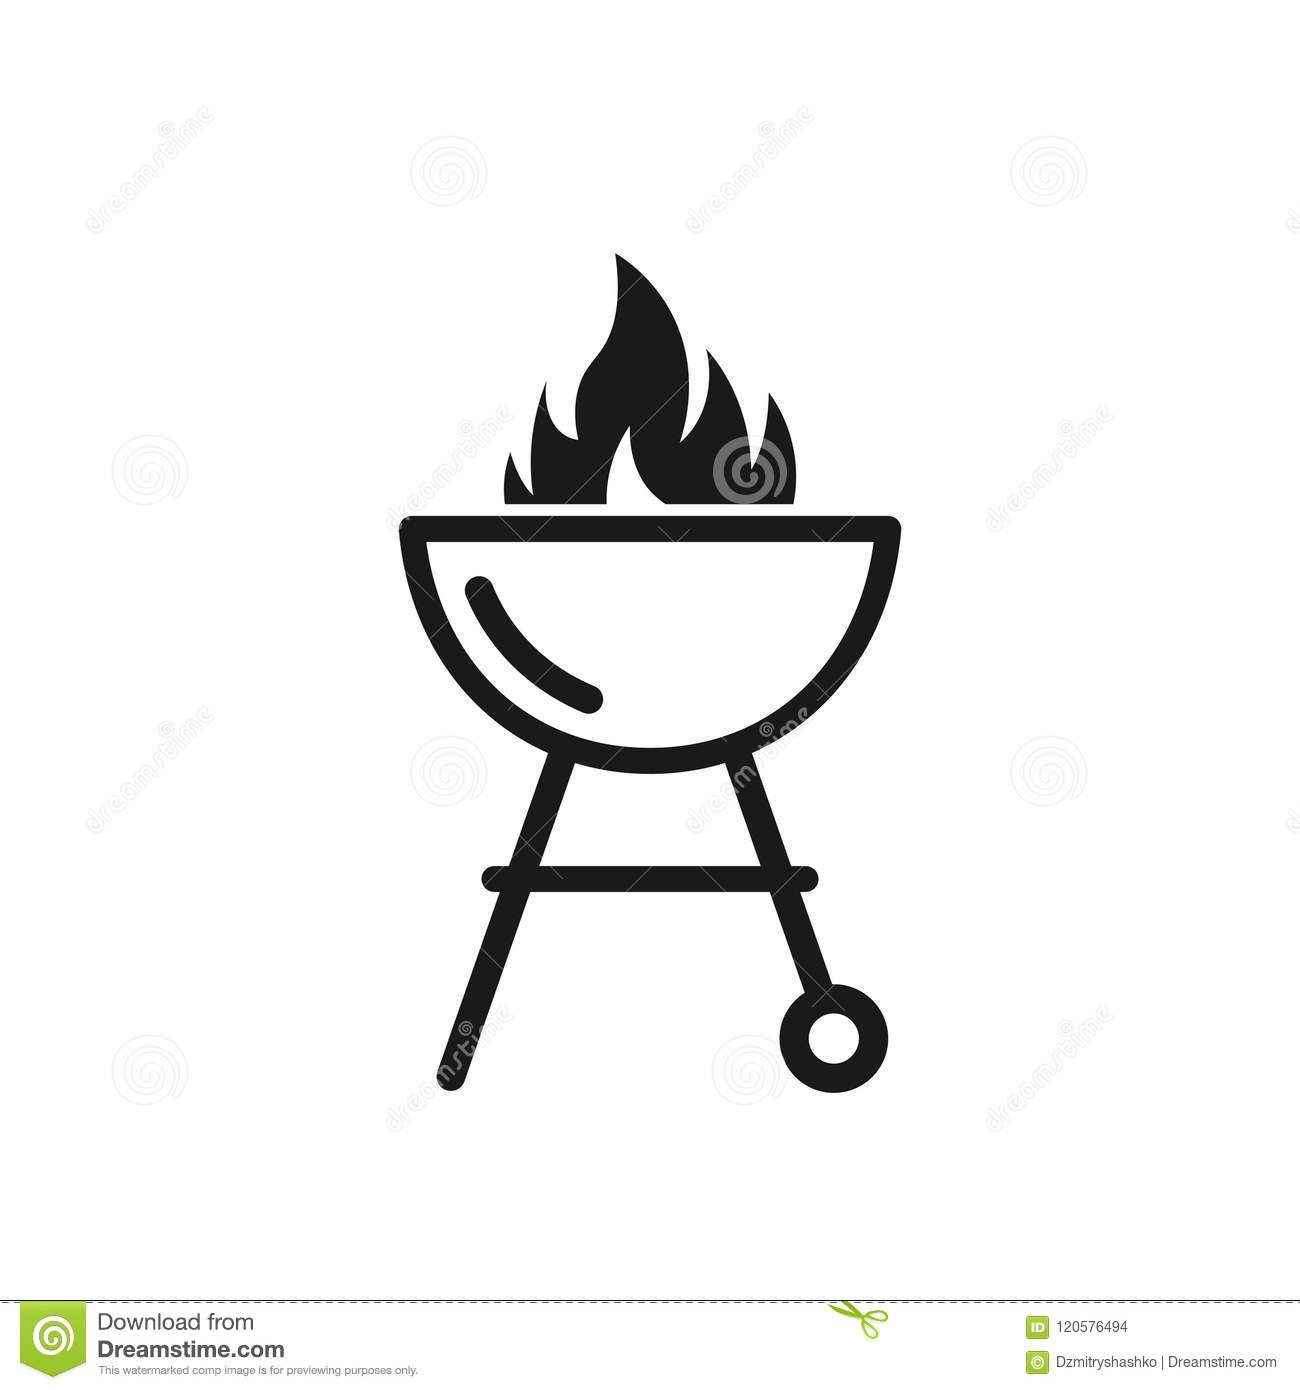 Black barbecue grill icon stock vector. Illustration of lunch.